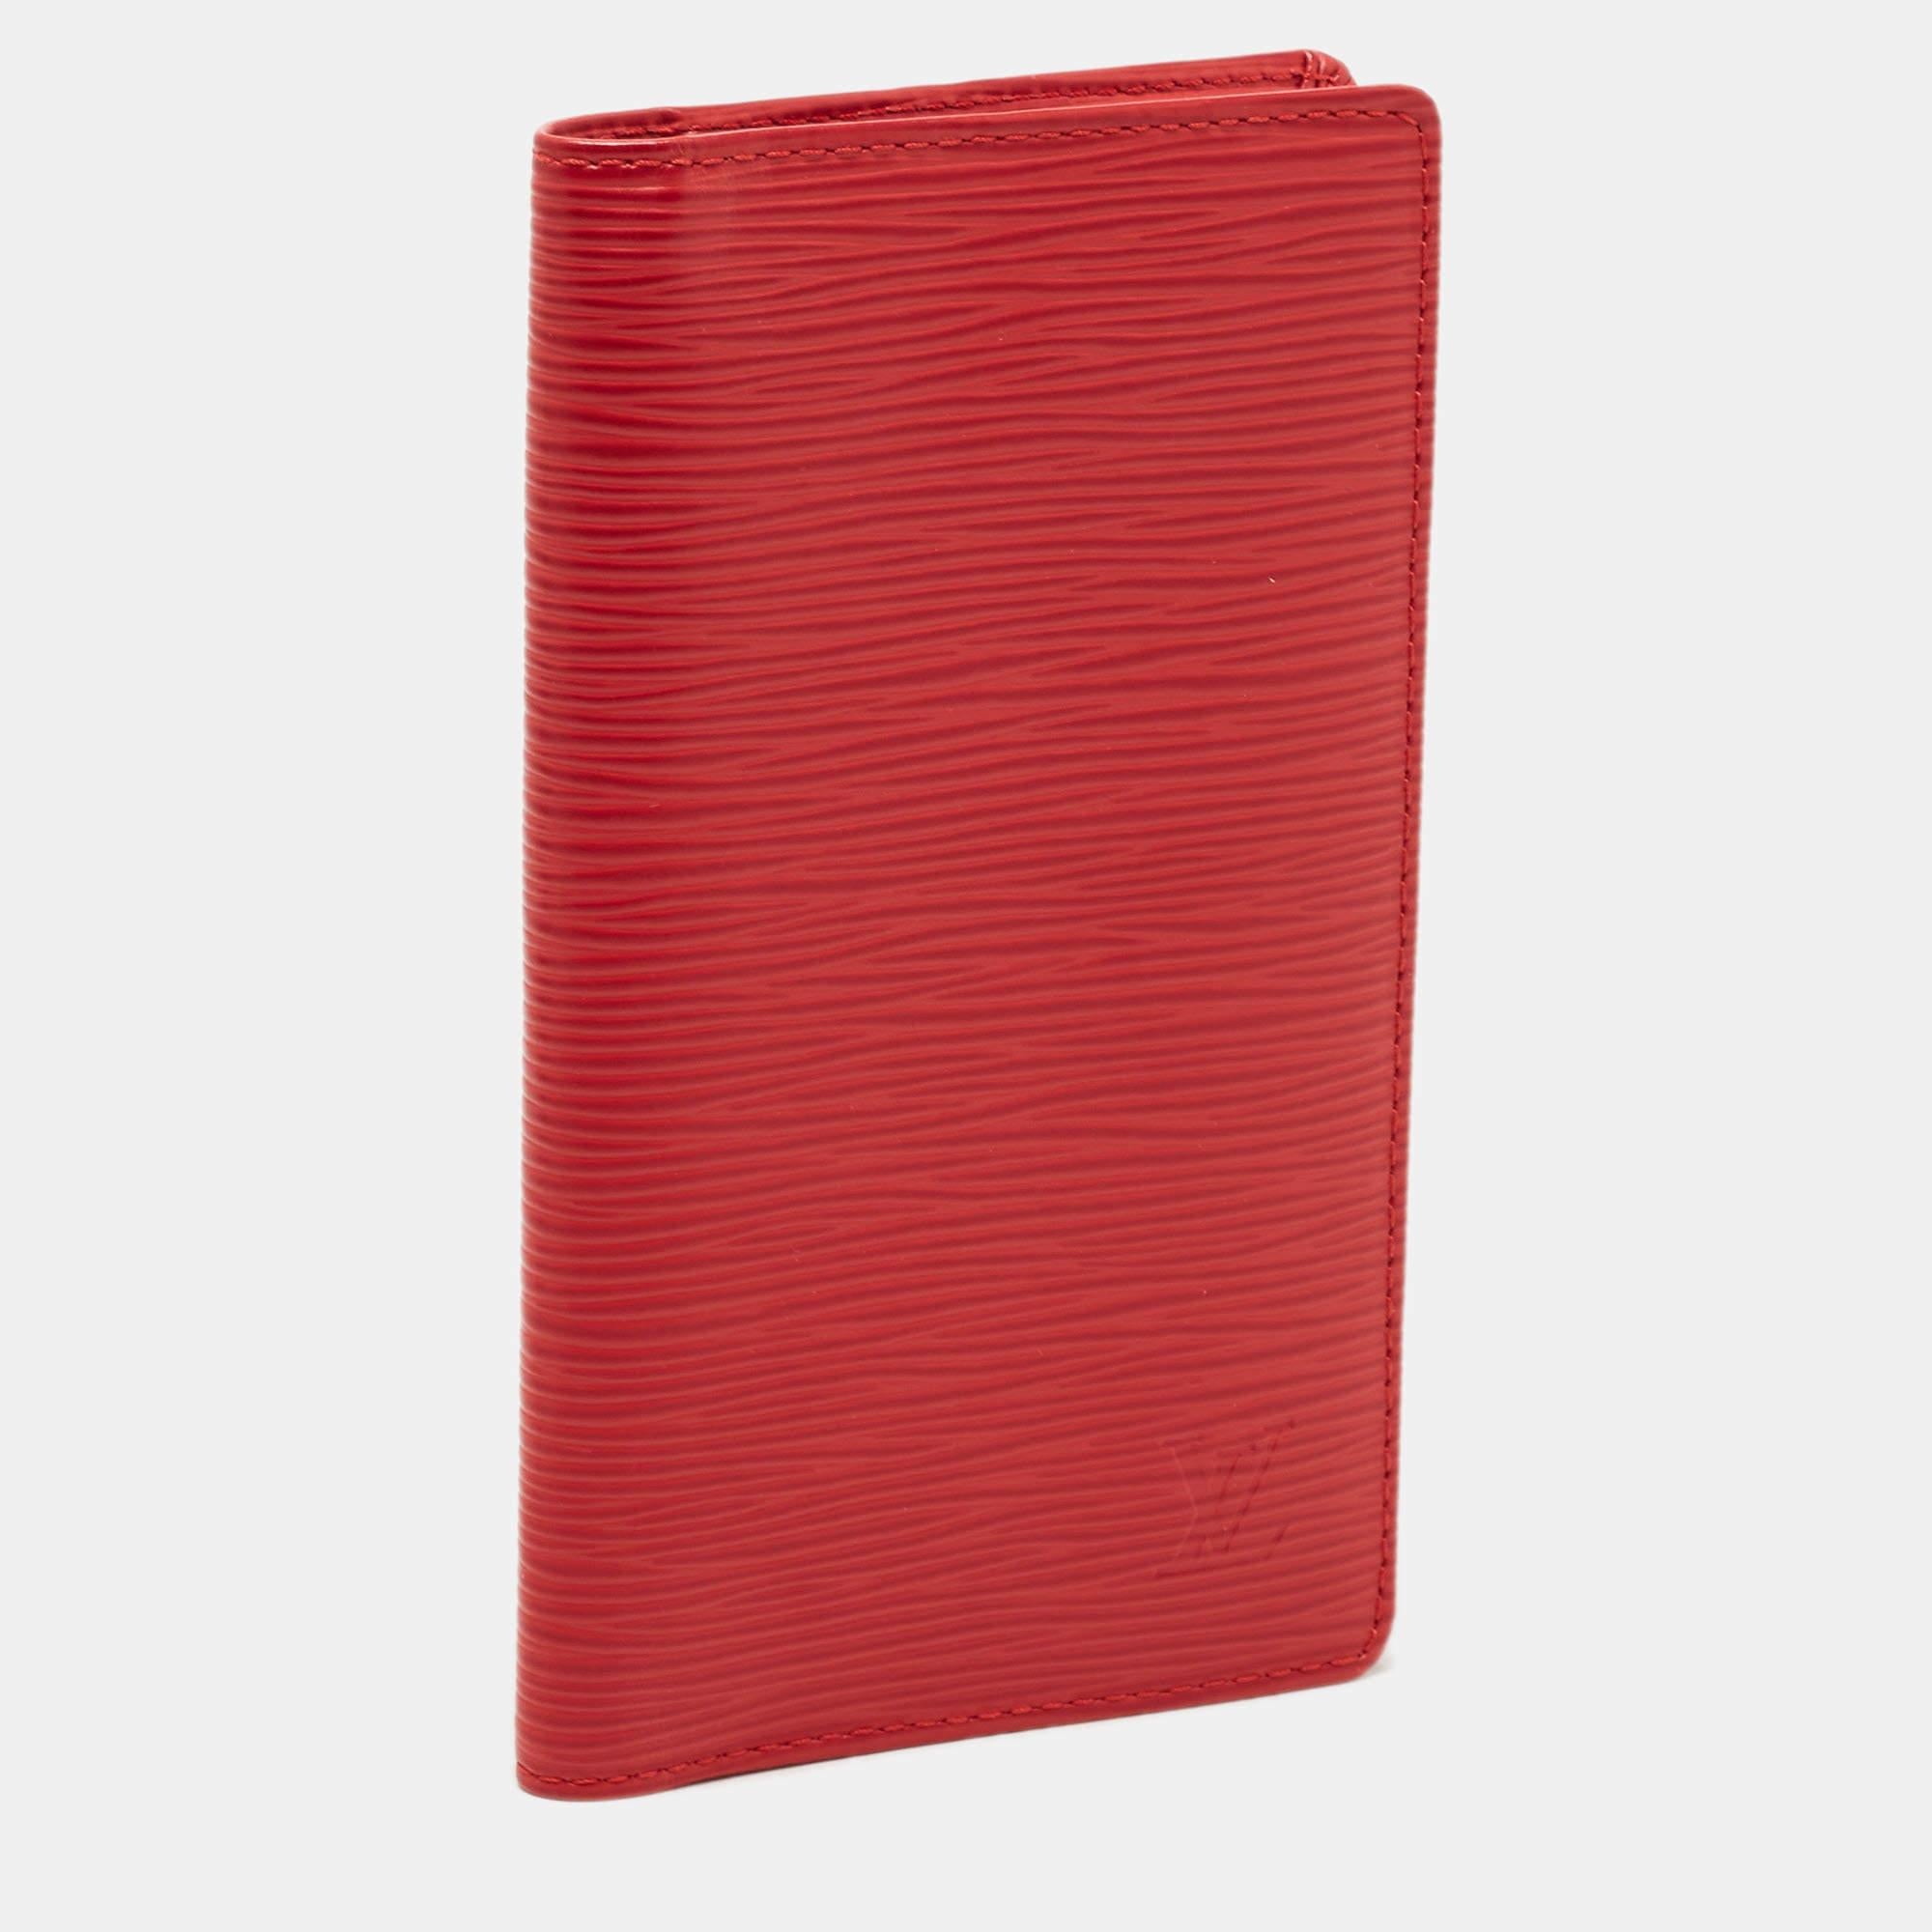 Crafted from vibrant red Epi leather, it features multiple card slots, a spacious pocket, and an ID window. With its sleek design and iconic LV logo, this organizer combines luxury and practicality effortlessly.

